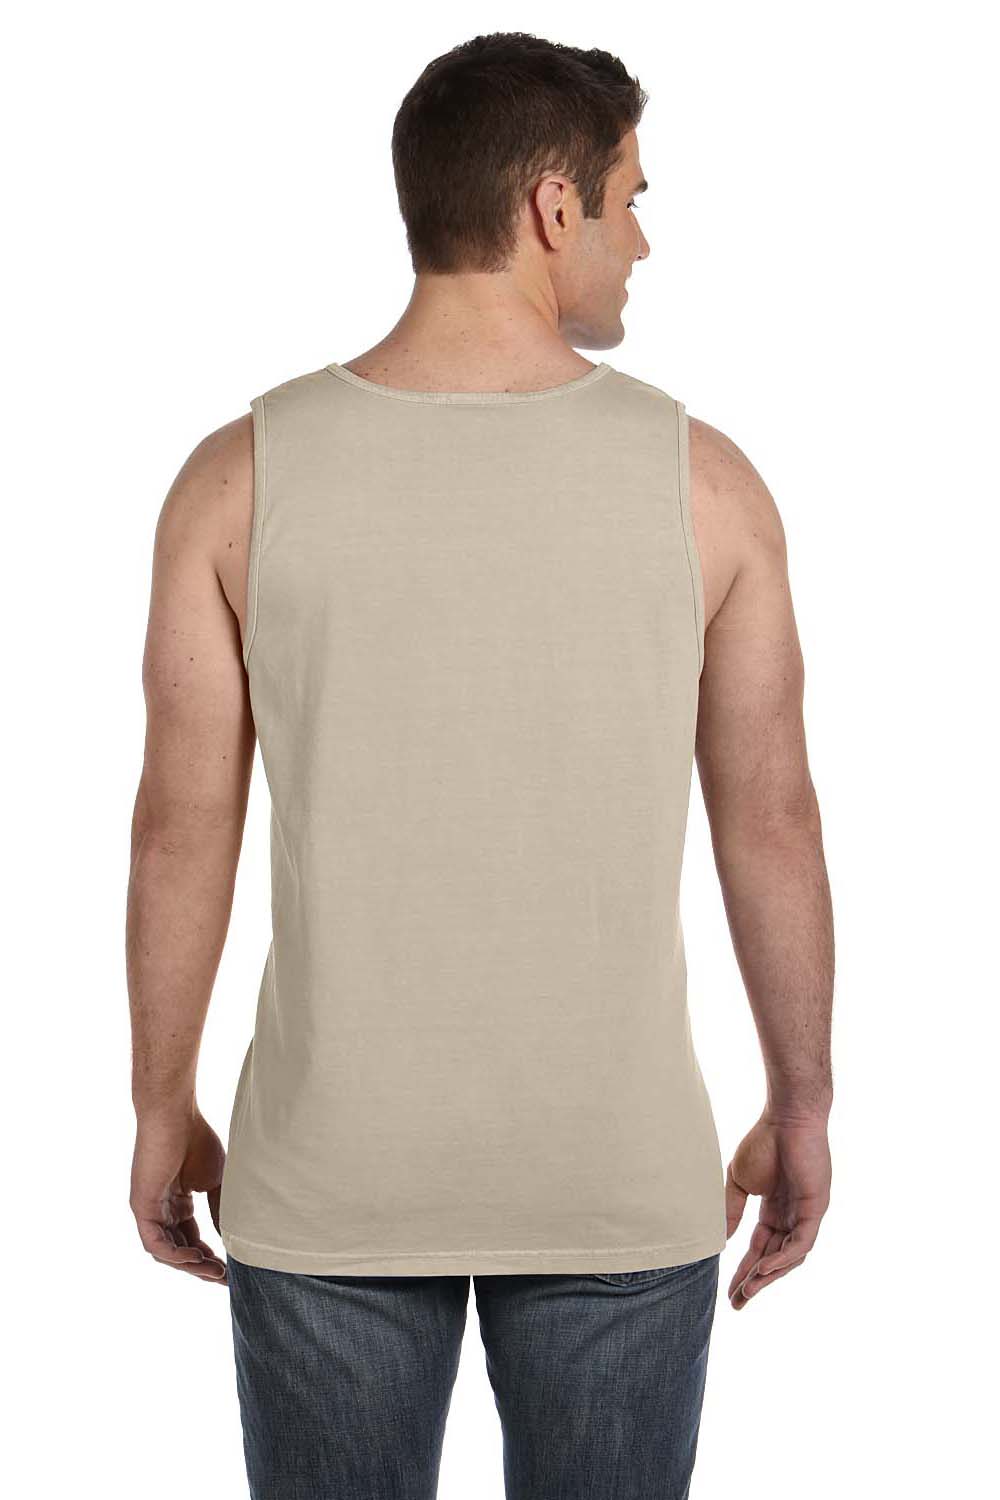 Beige Men's Tank tops and sleeveless t-shirts